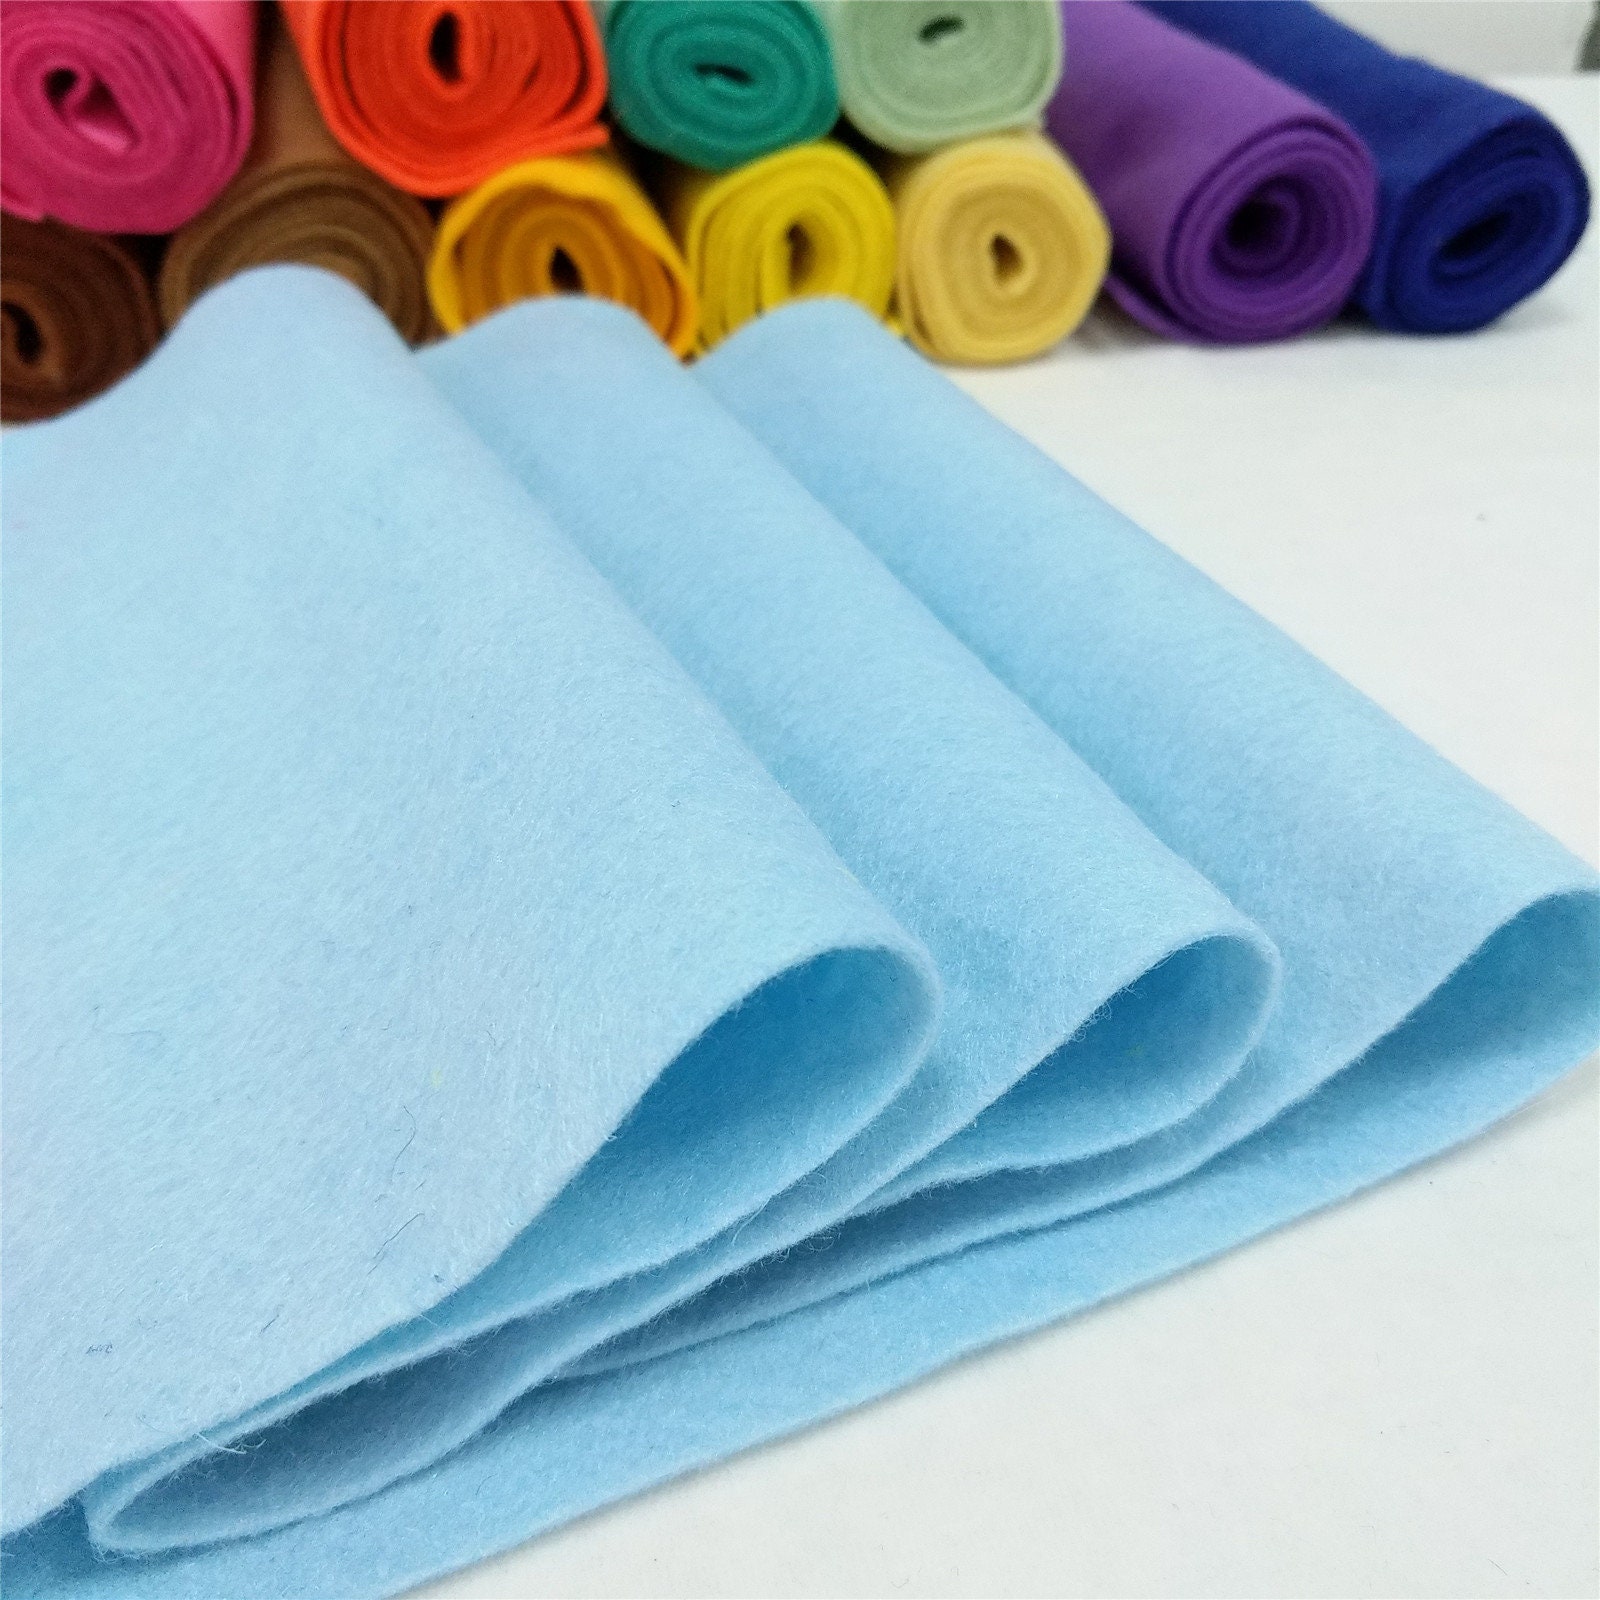 FabricLA Craft Felt Fabric - 18 X 18 Inch Wide & 1.6mm Thick Felt Fabric  - Baby Blue - Use This Soft Felt for Crafts - Felt Material Pack